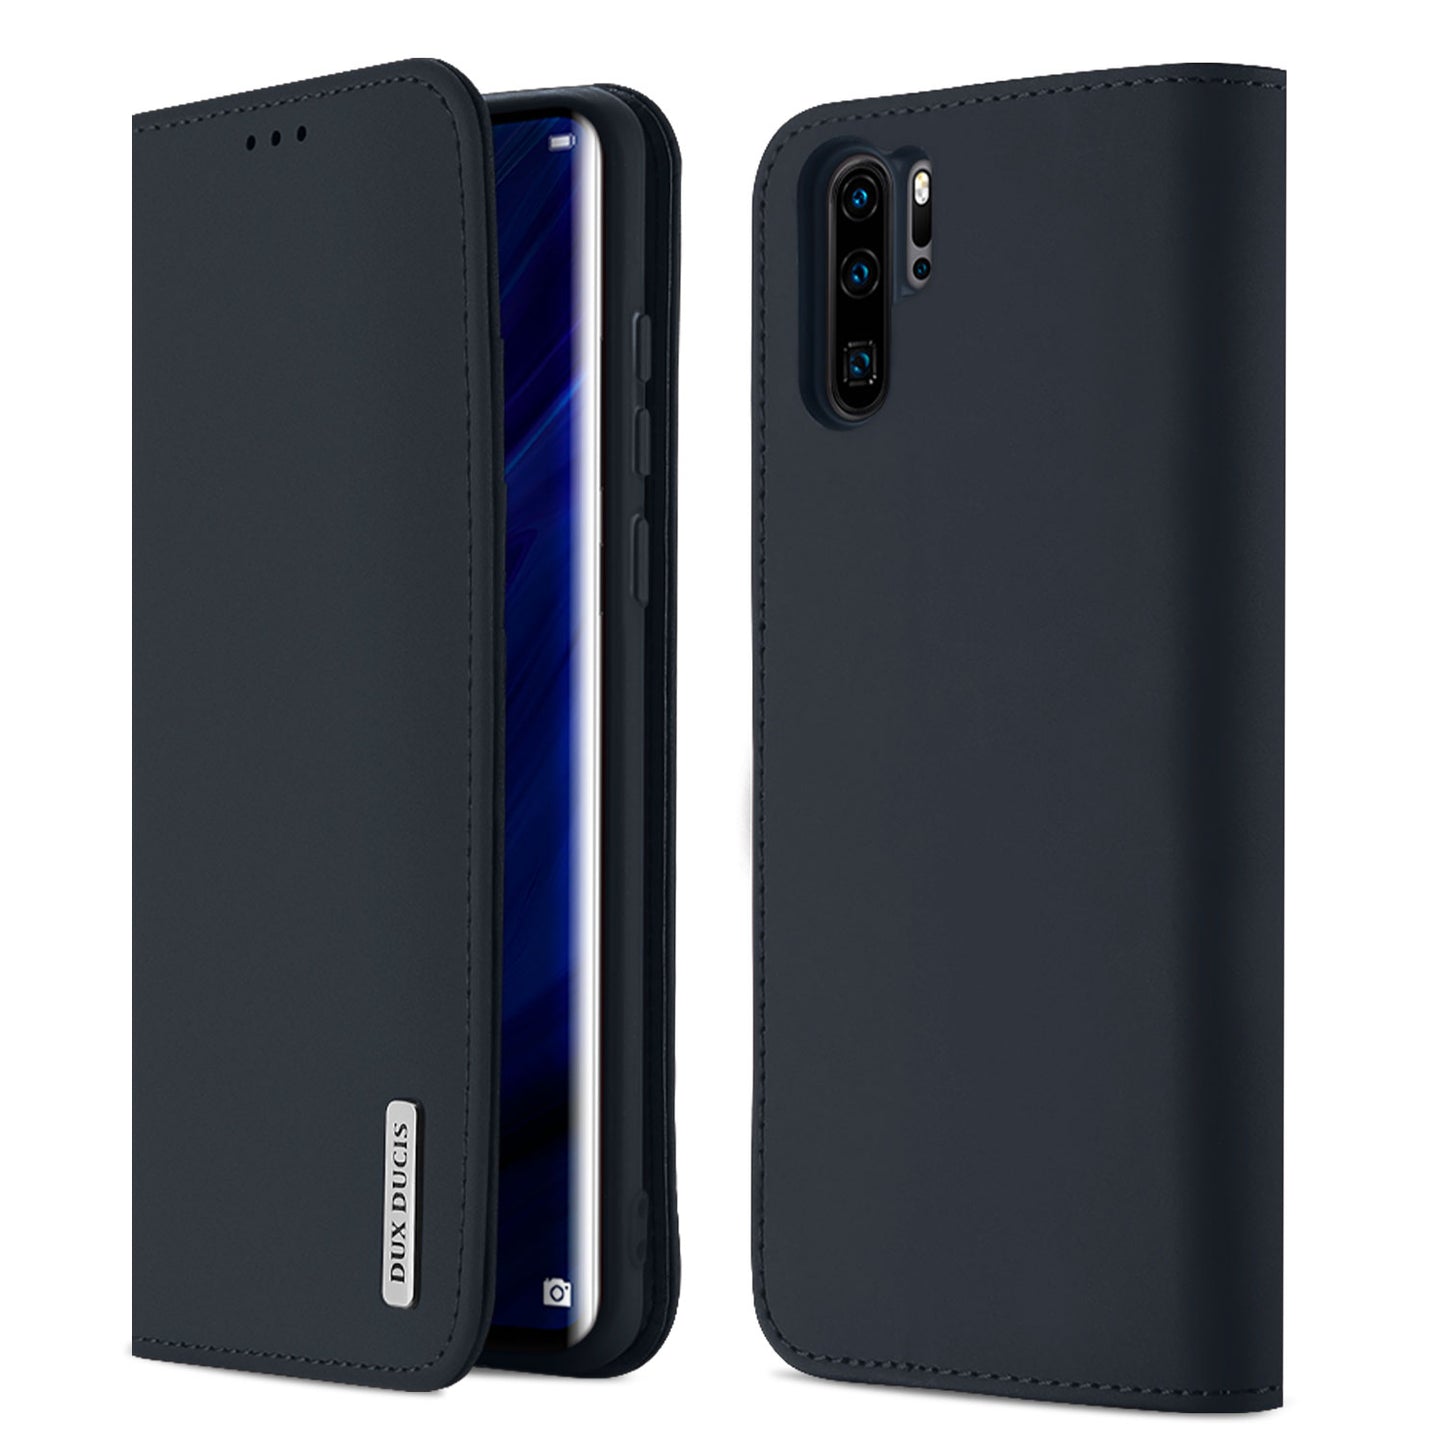 DUX DUCIS For Huawei P30 pro Luxury Genuine Leather Magnetic Flip Cover Full Protective Case with Bracket Card Slot blue_Huawei P30 pro ZopiStyle